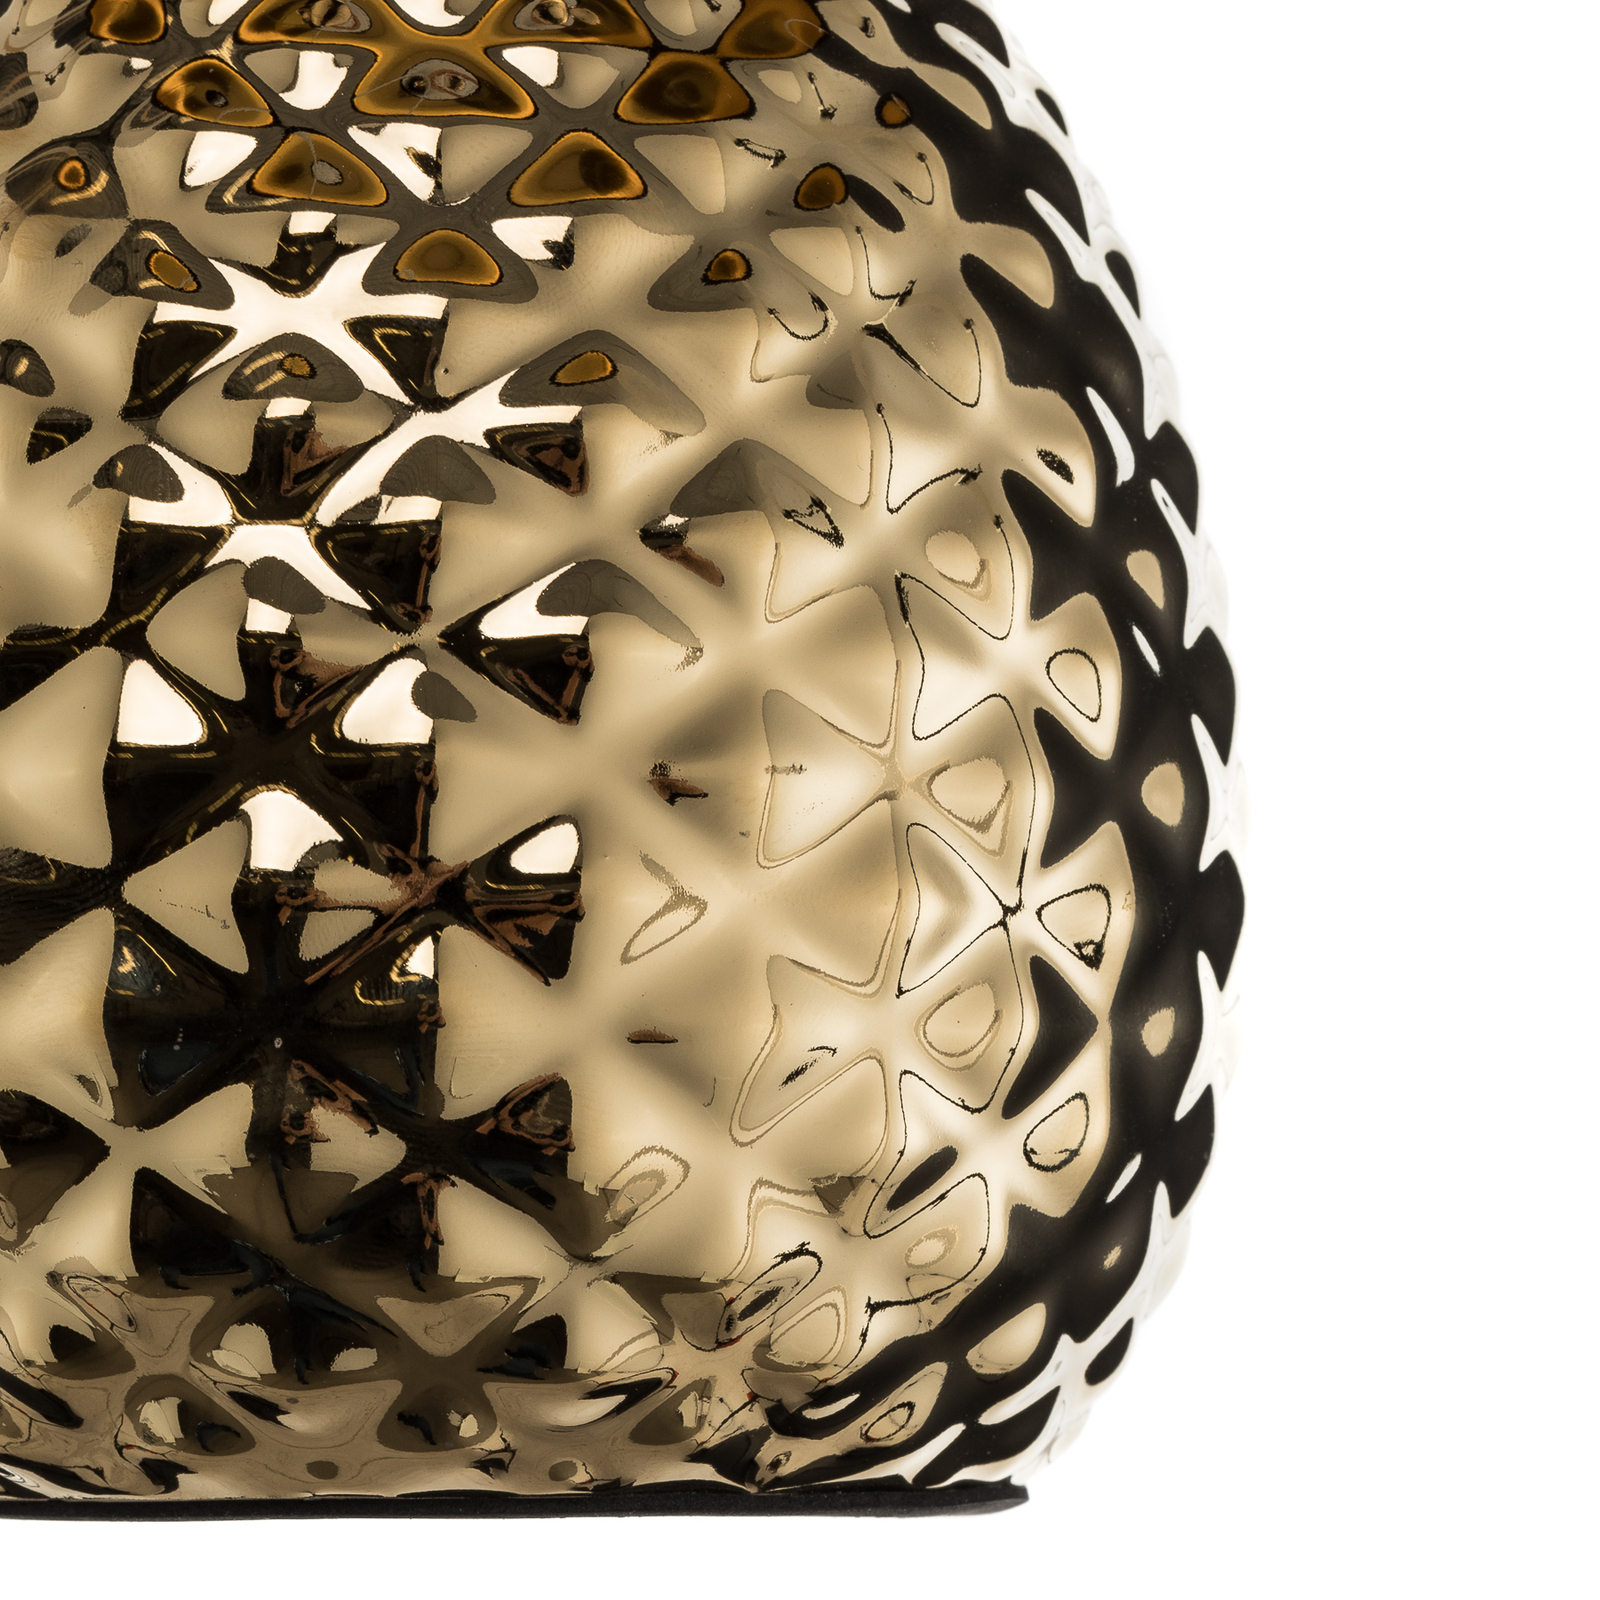 Pineapple ceramic table lamp, black and gold